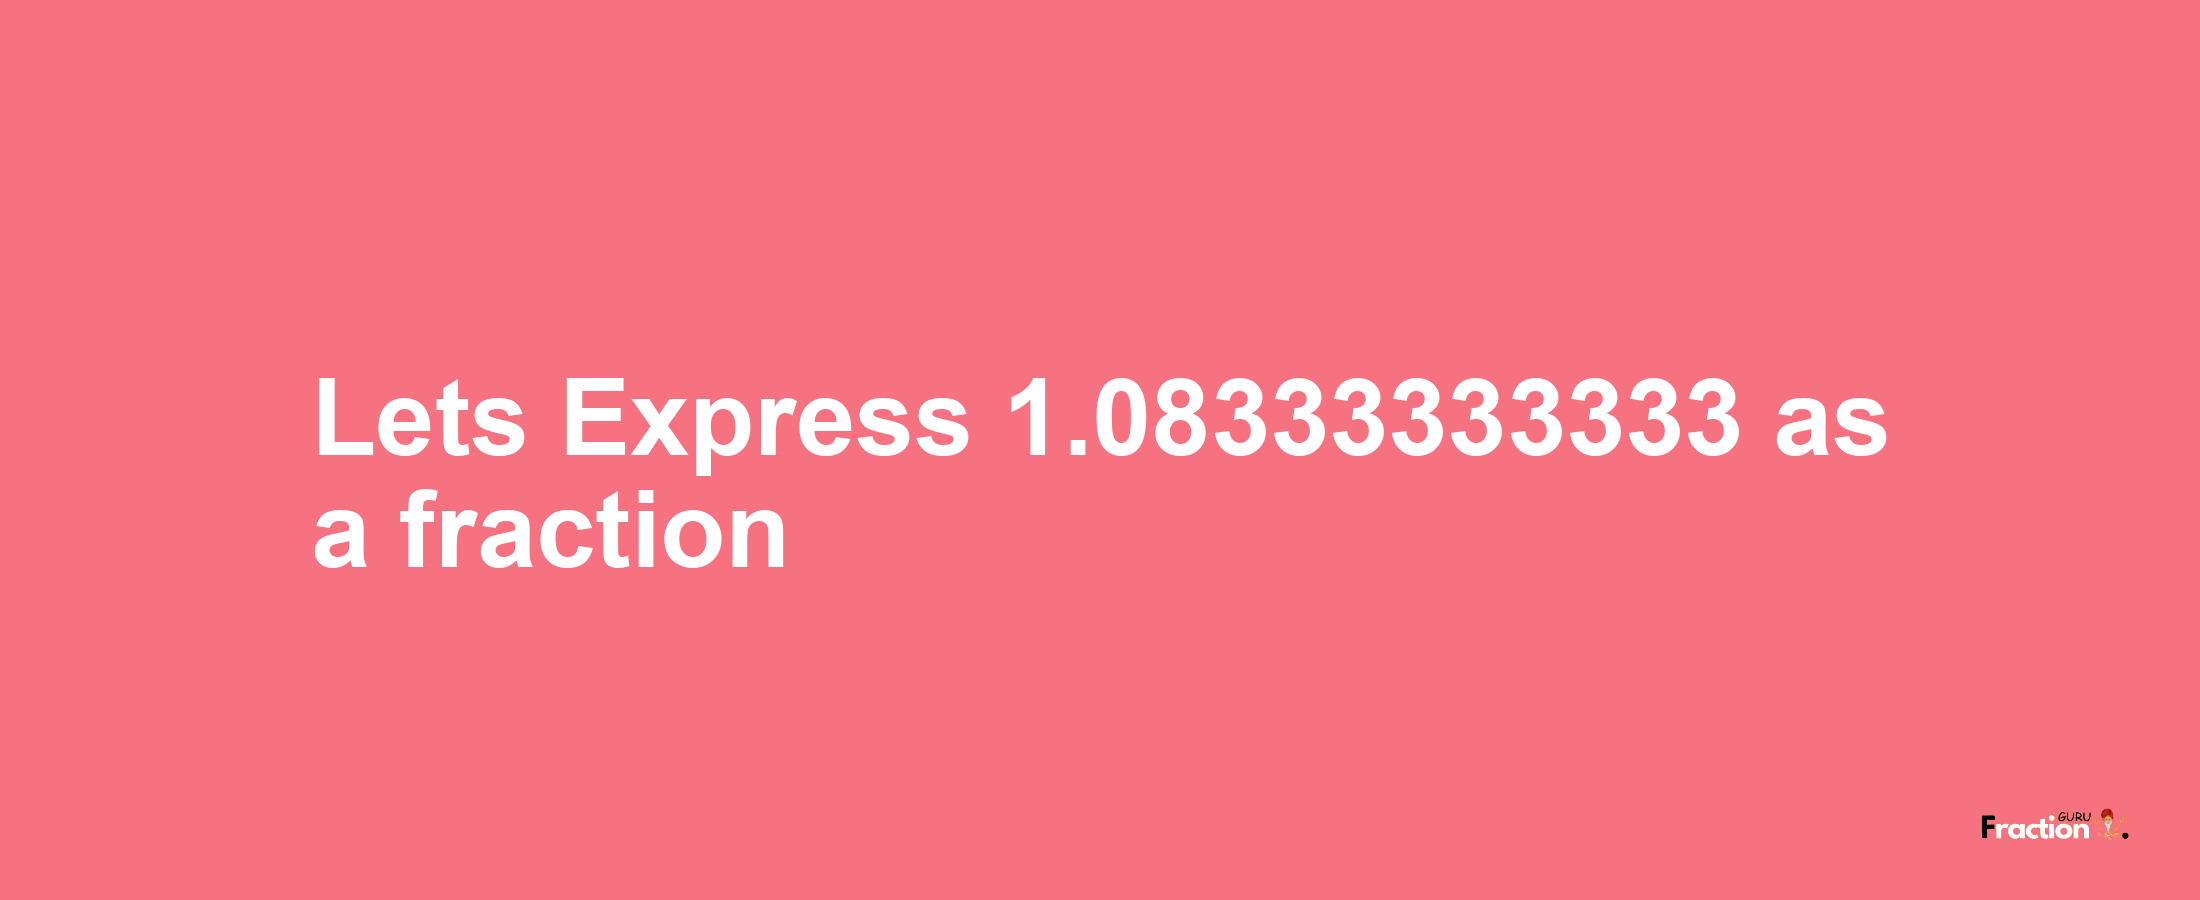 Lets Express 1.08333333333 as afraction